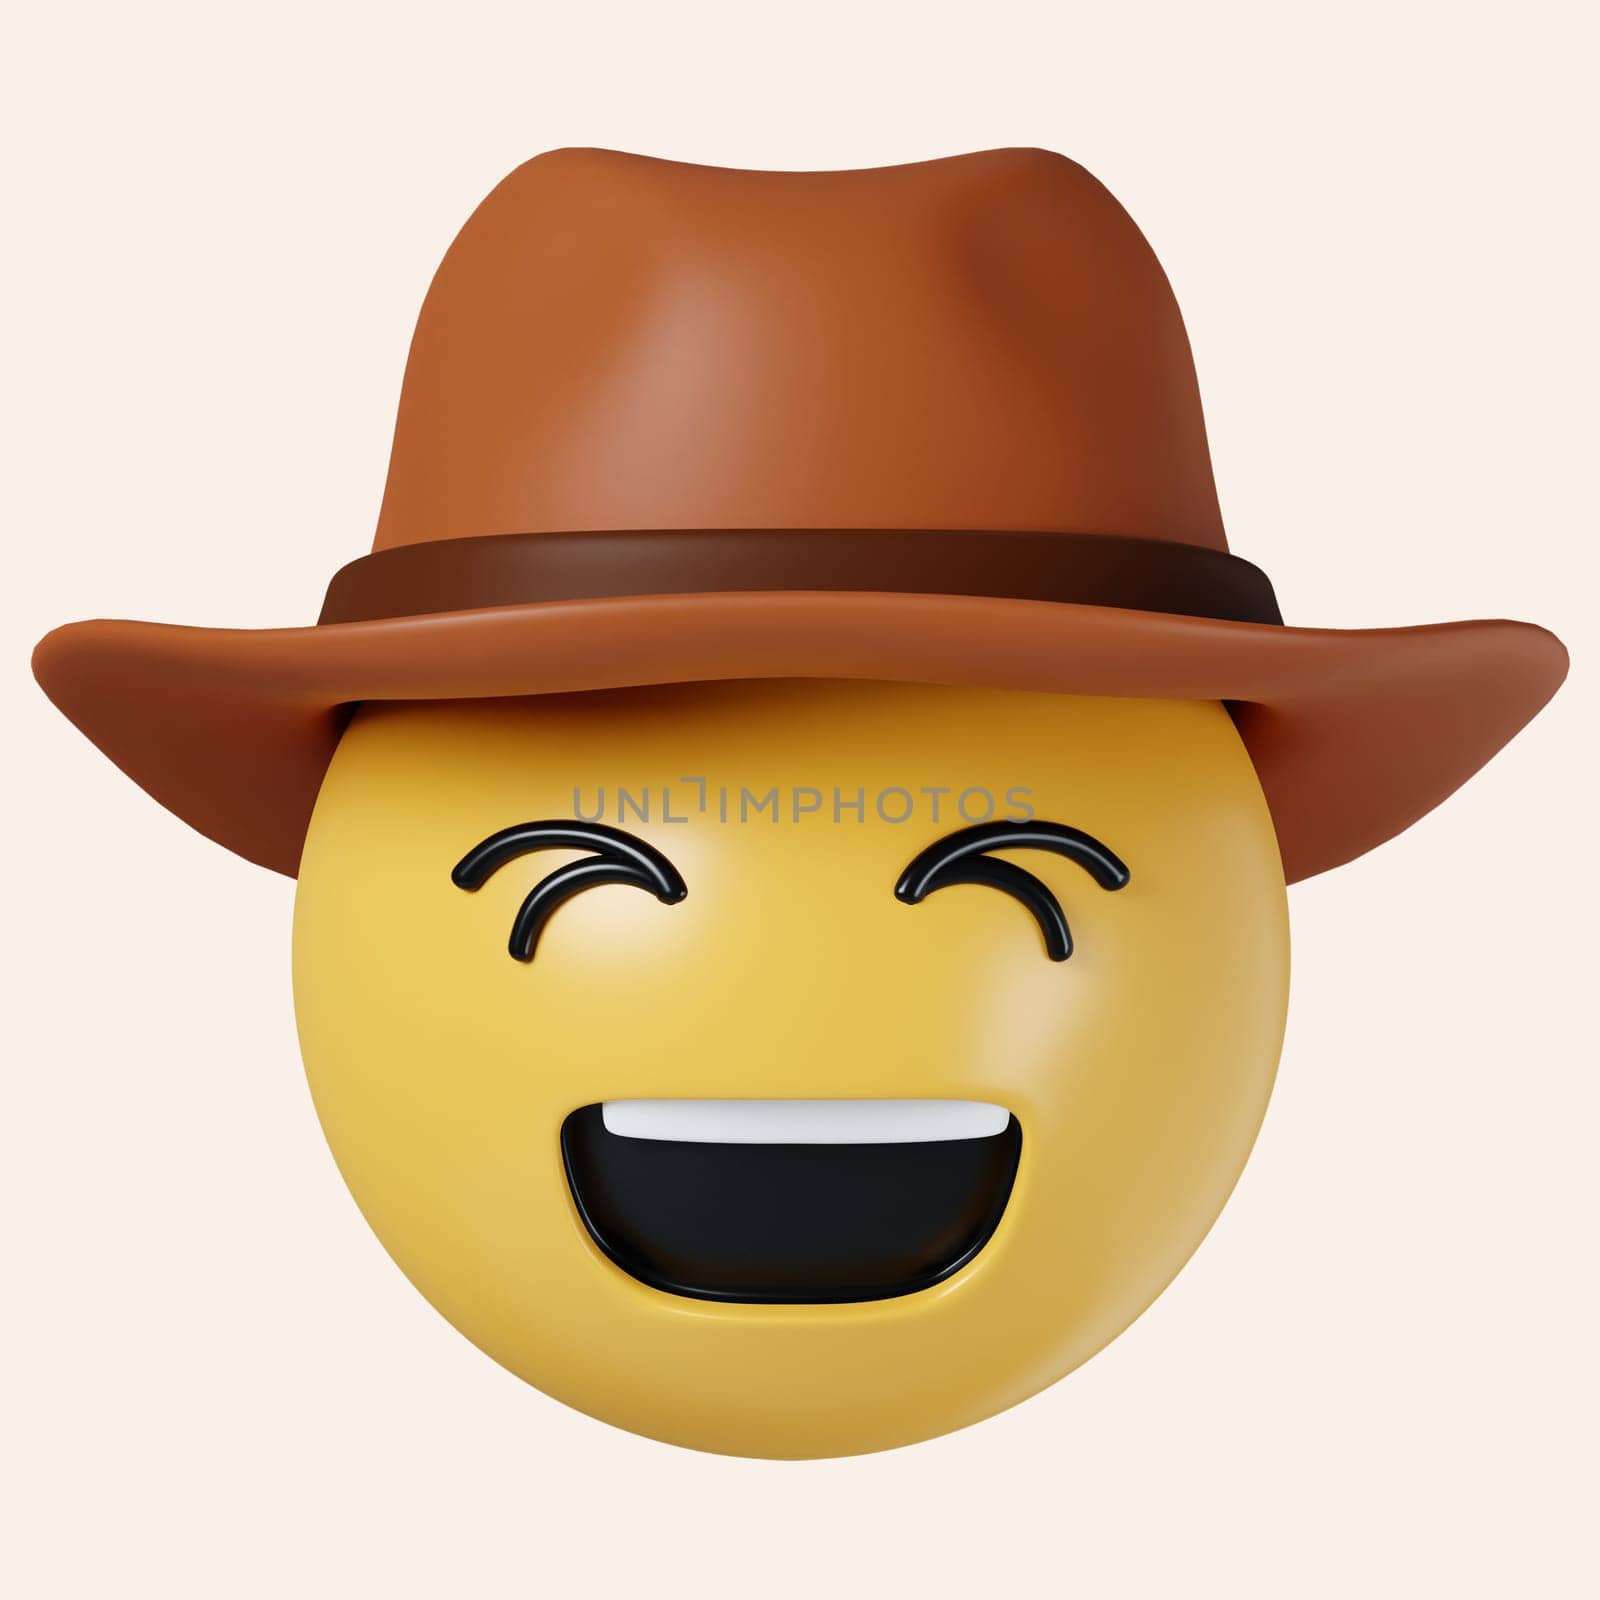 3d Cowboy hat emoji. Happy smiled emoticon with brown leather brimmed hat. icon isolated on gray background. 3d rendering illustration. Clipping path. by meepiangraphic